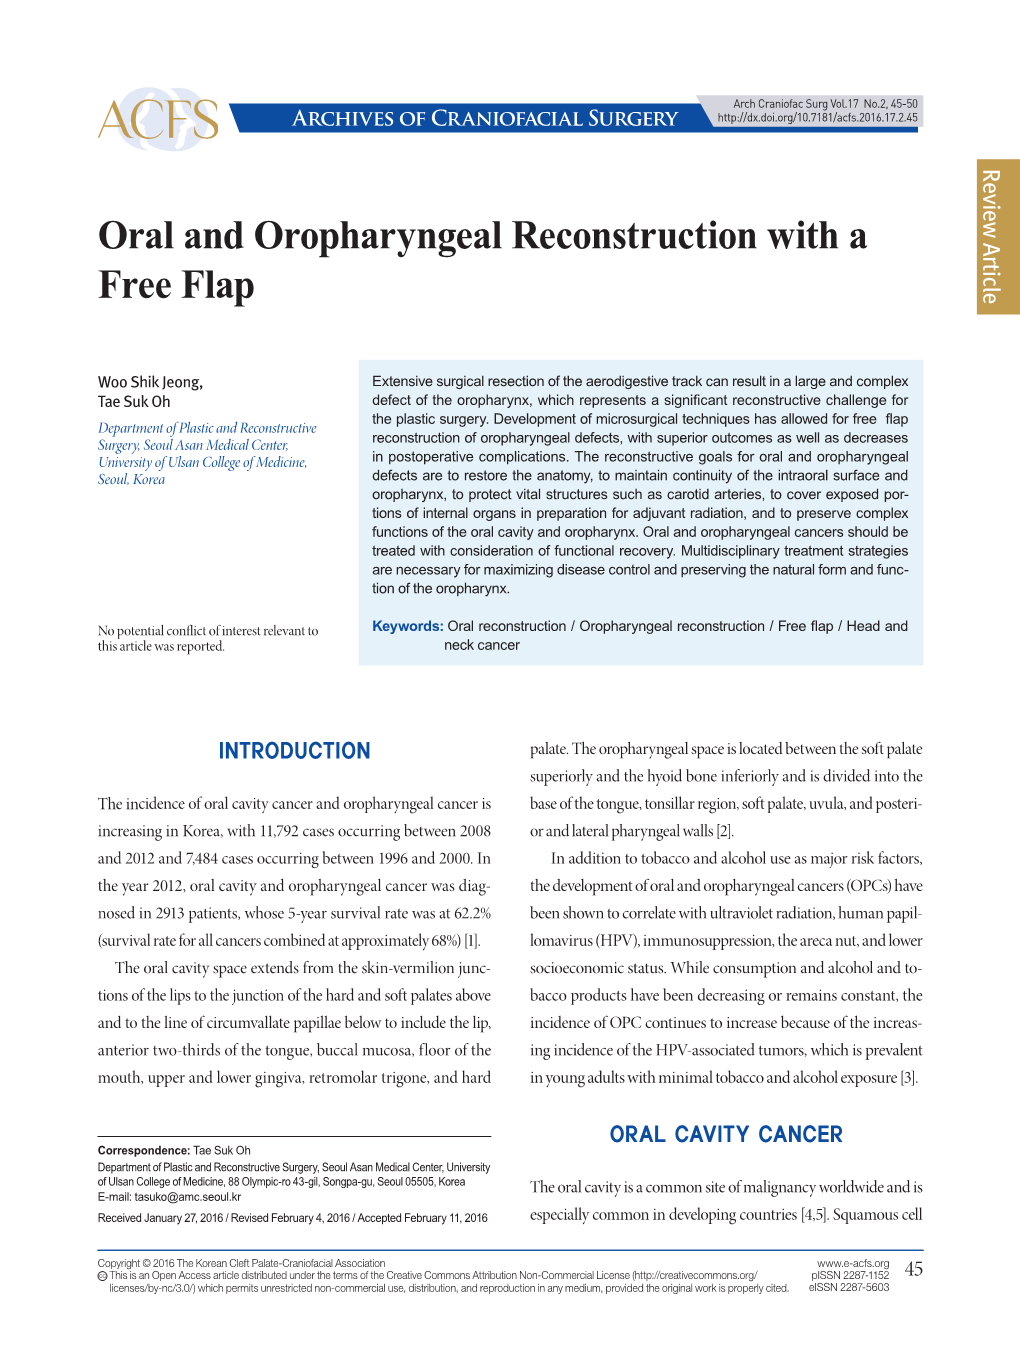 Oral and Oropharyngeal Reconstruction with a Free Flap